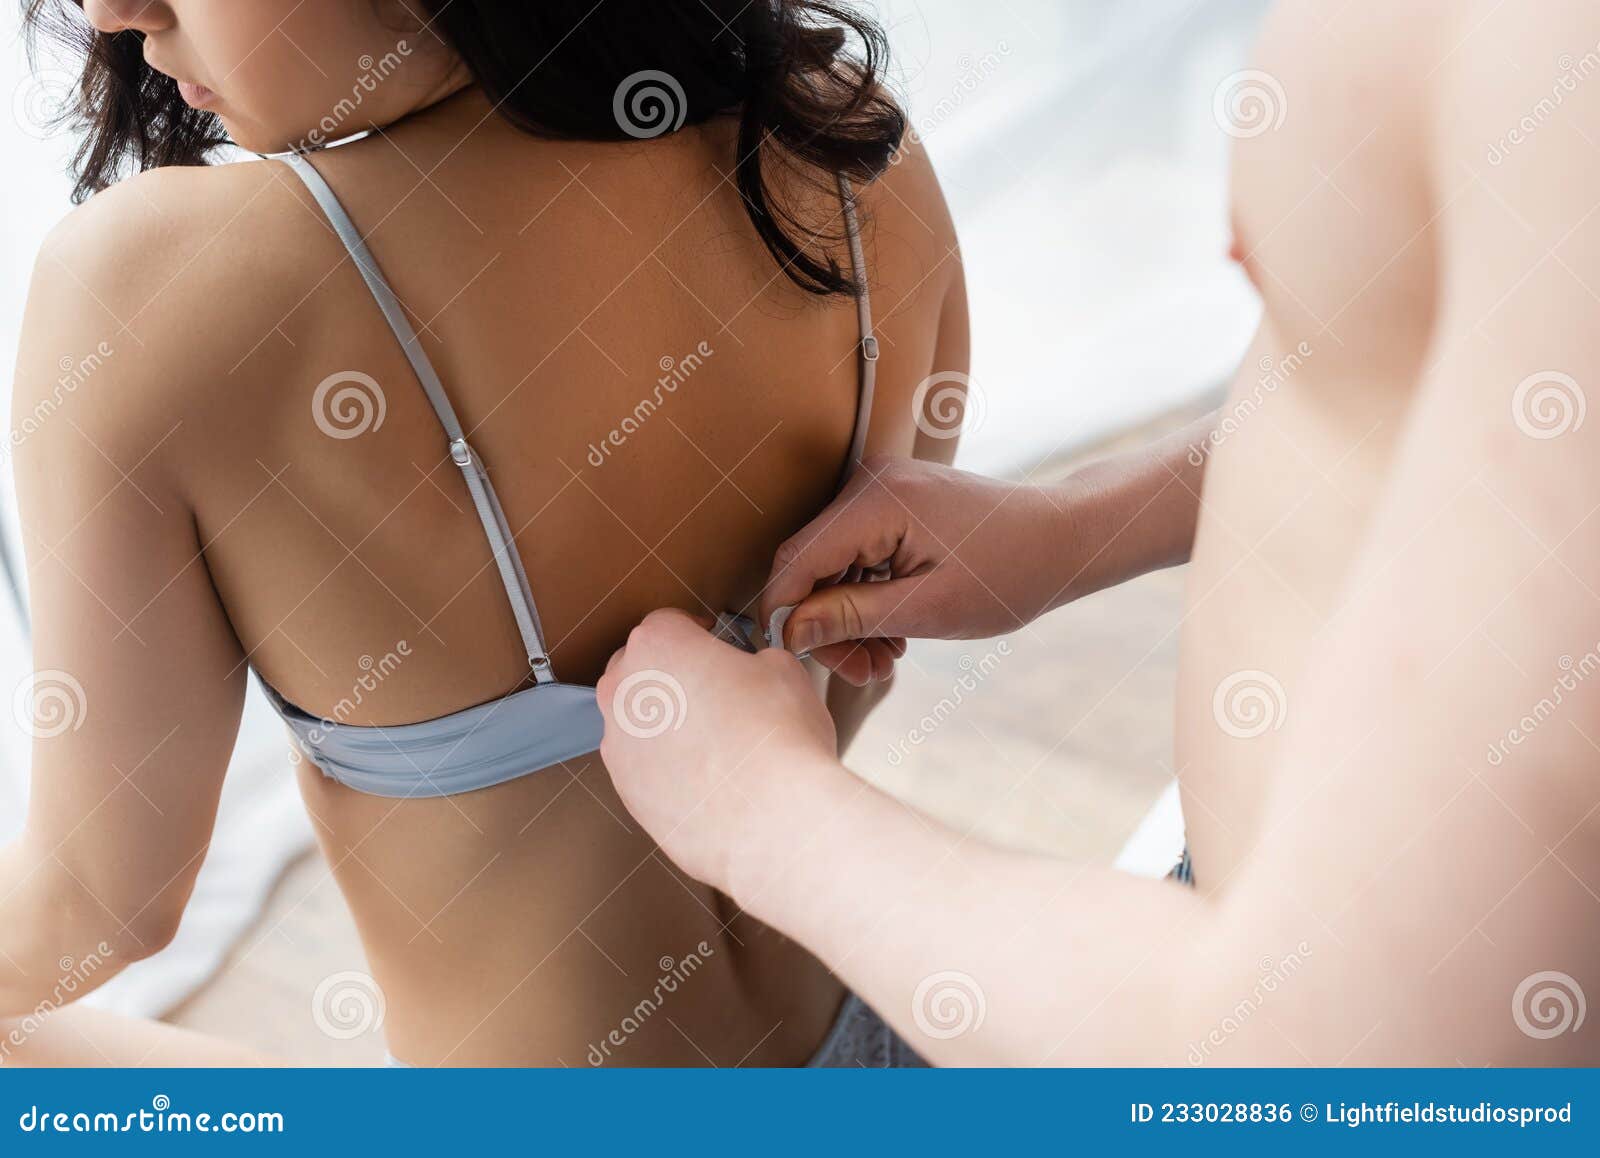 Cropped View of Man Unhooking Bra Stock Photo - Image of couple